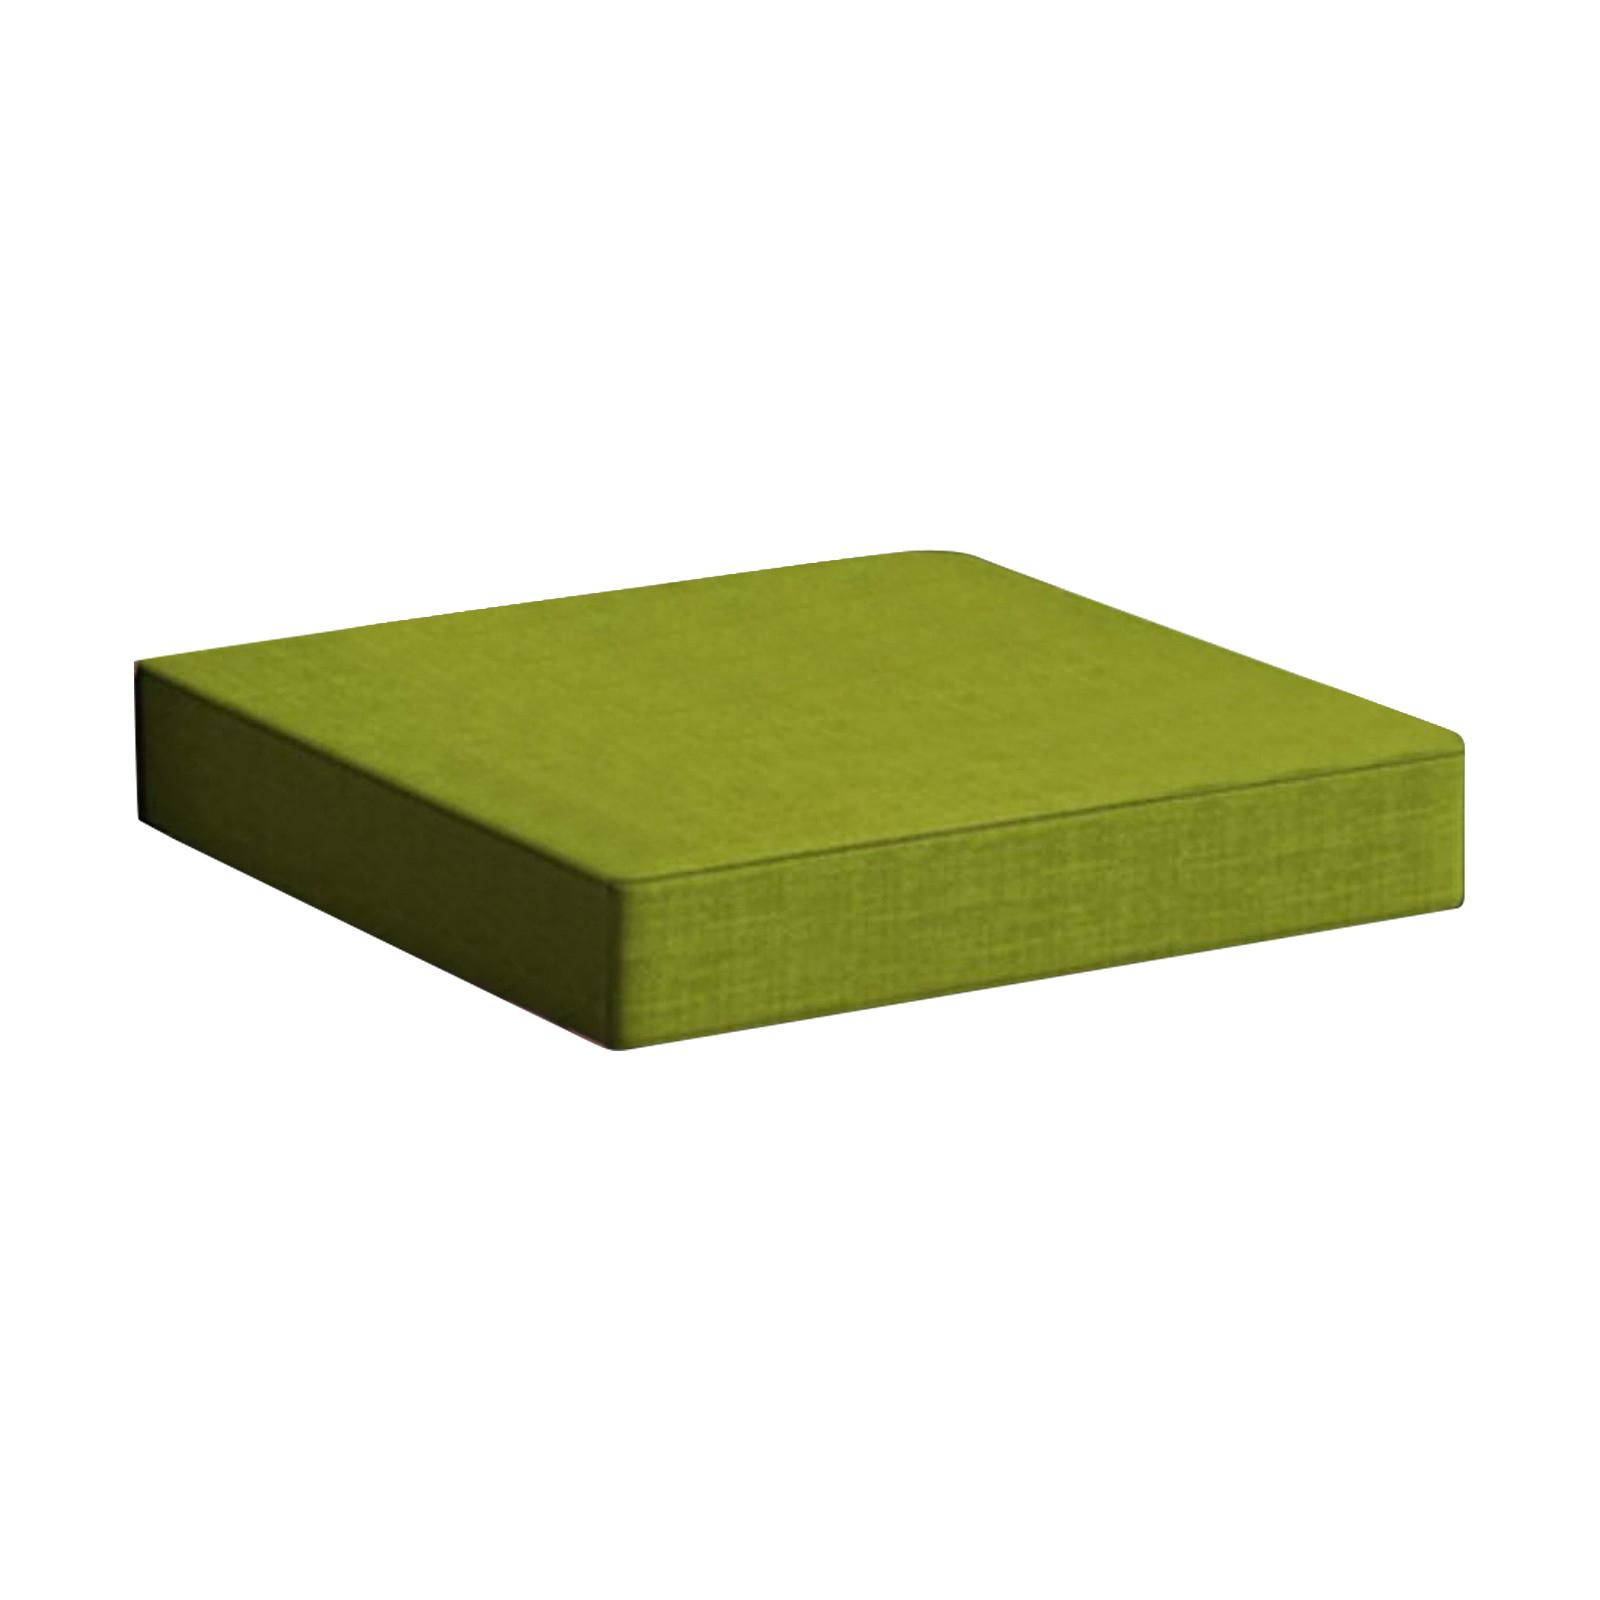 Seat Pads Cushion ,Waterproof Chair Cushions Garden Cushion,Furniture Seat Pads Cushion Pad Indoors Outdoors,Garden Seat Pads Cushion Memory Foam for chairs, Garden Green - image 2 of 6